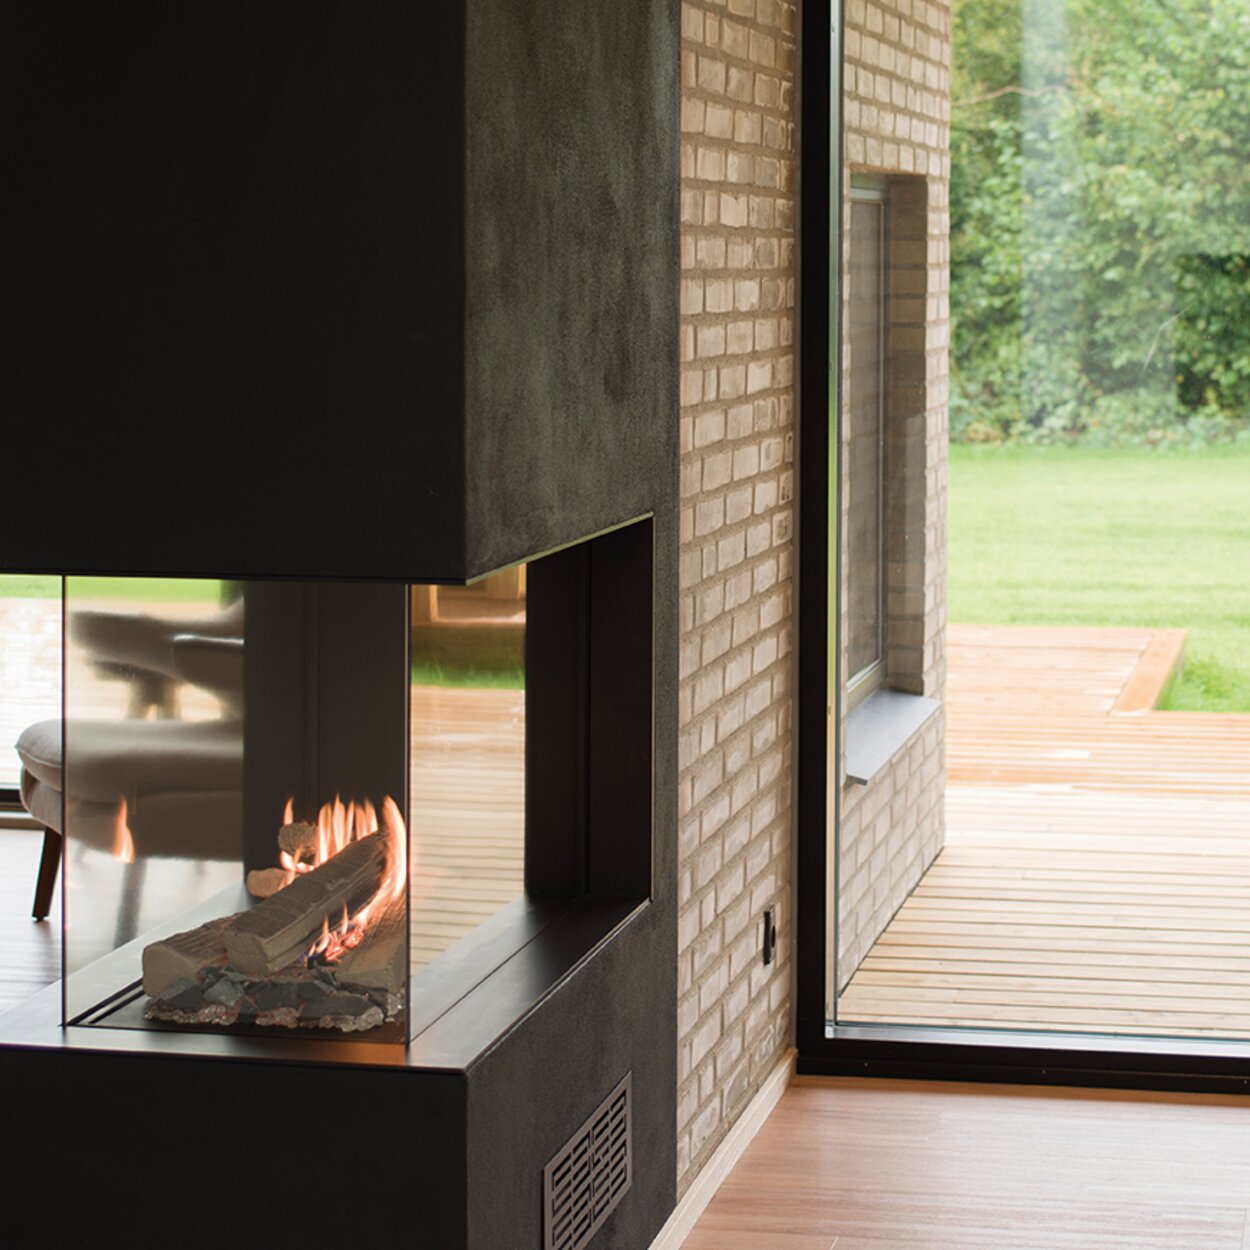 VISIO 70 RD gas fireplace stands as a room divider in a black partition, structuring the elegant living room with wooden floor and large French doors to the garden